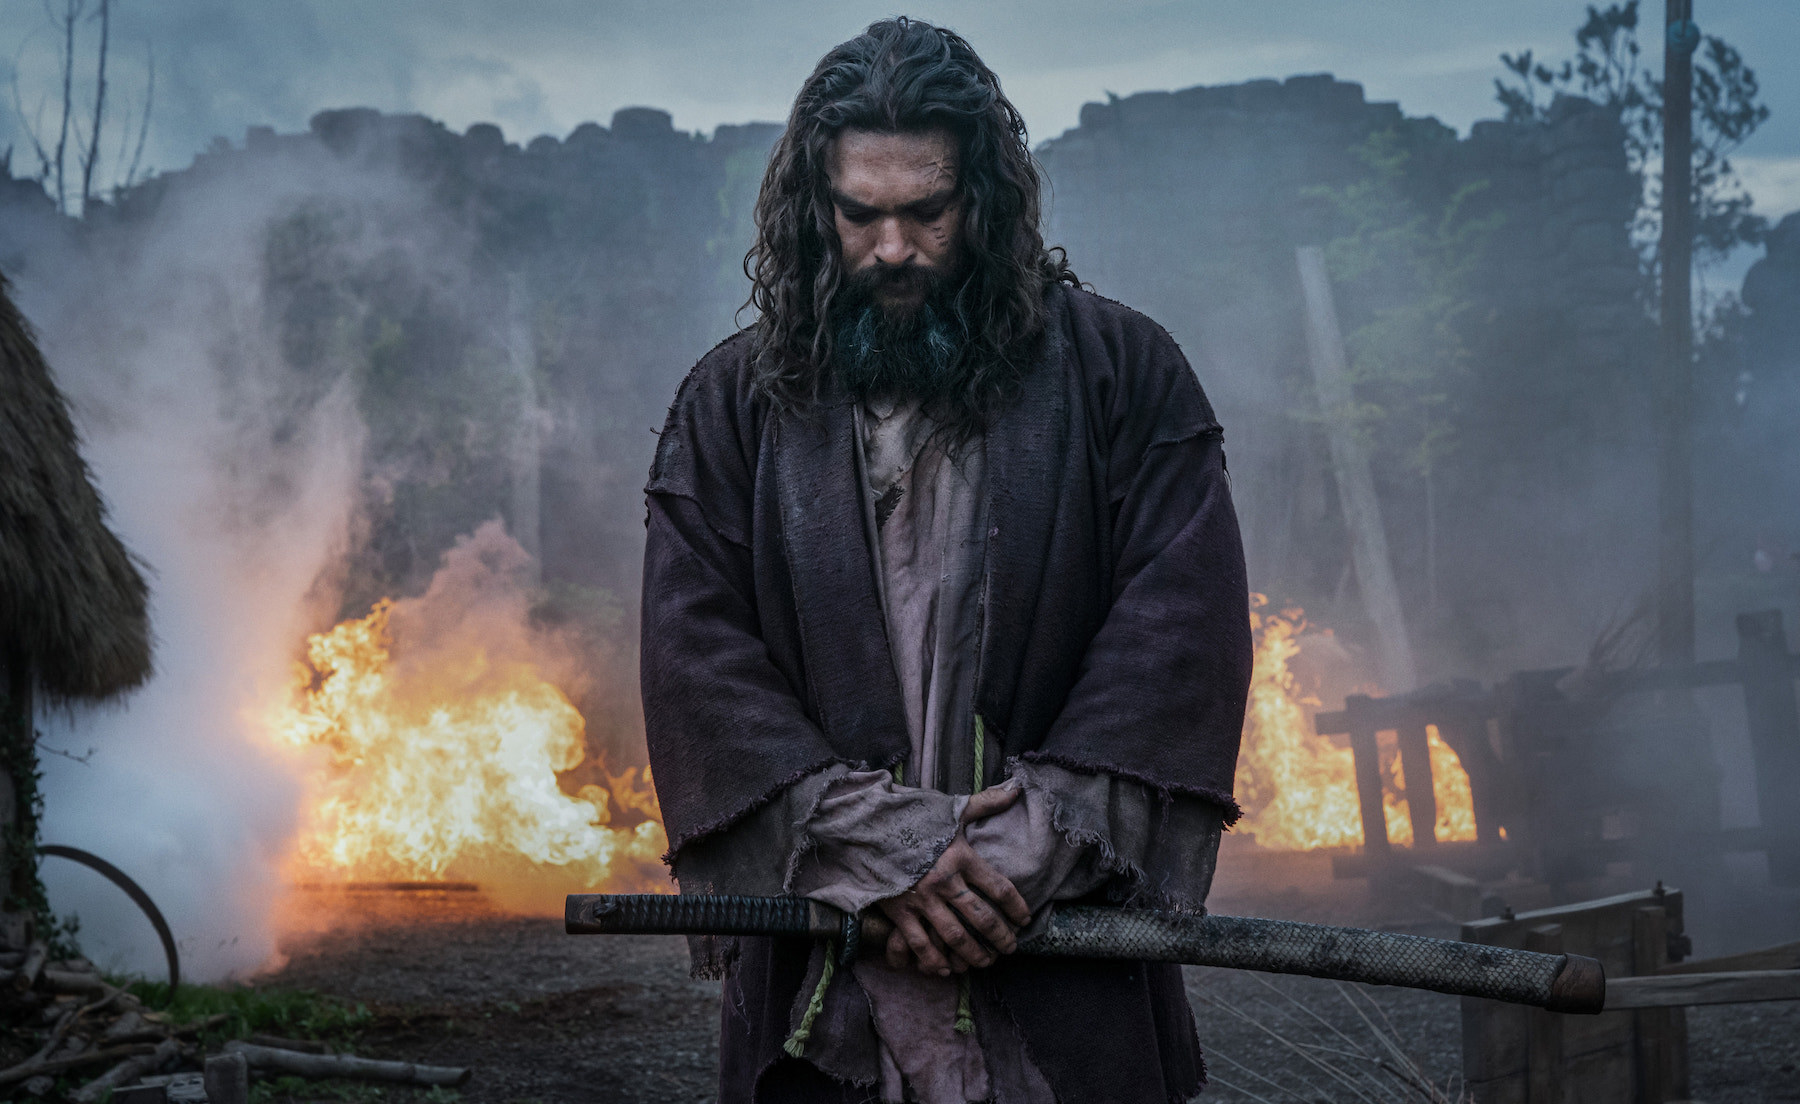 A man played by jason momoa in tattered robes stands in a burning forest with a samurai sword in his hands and looks down as if in prayer